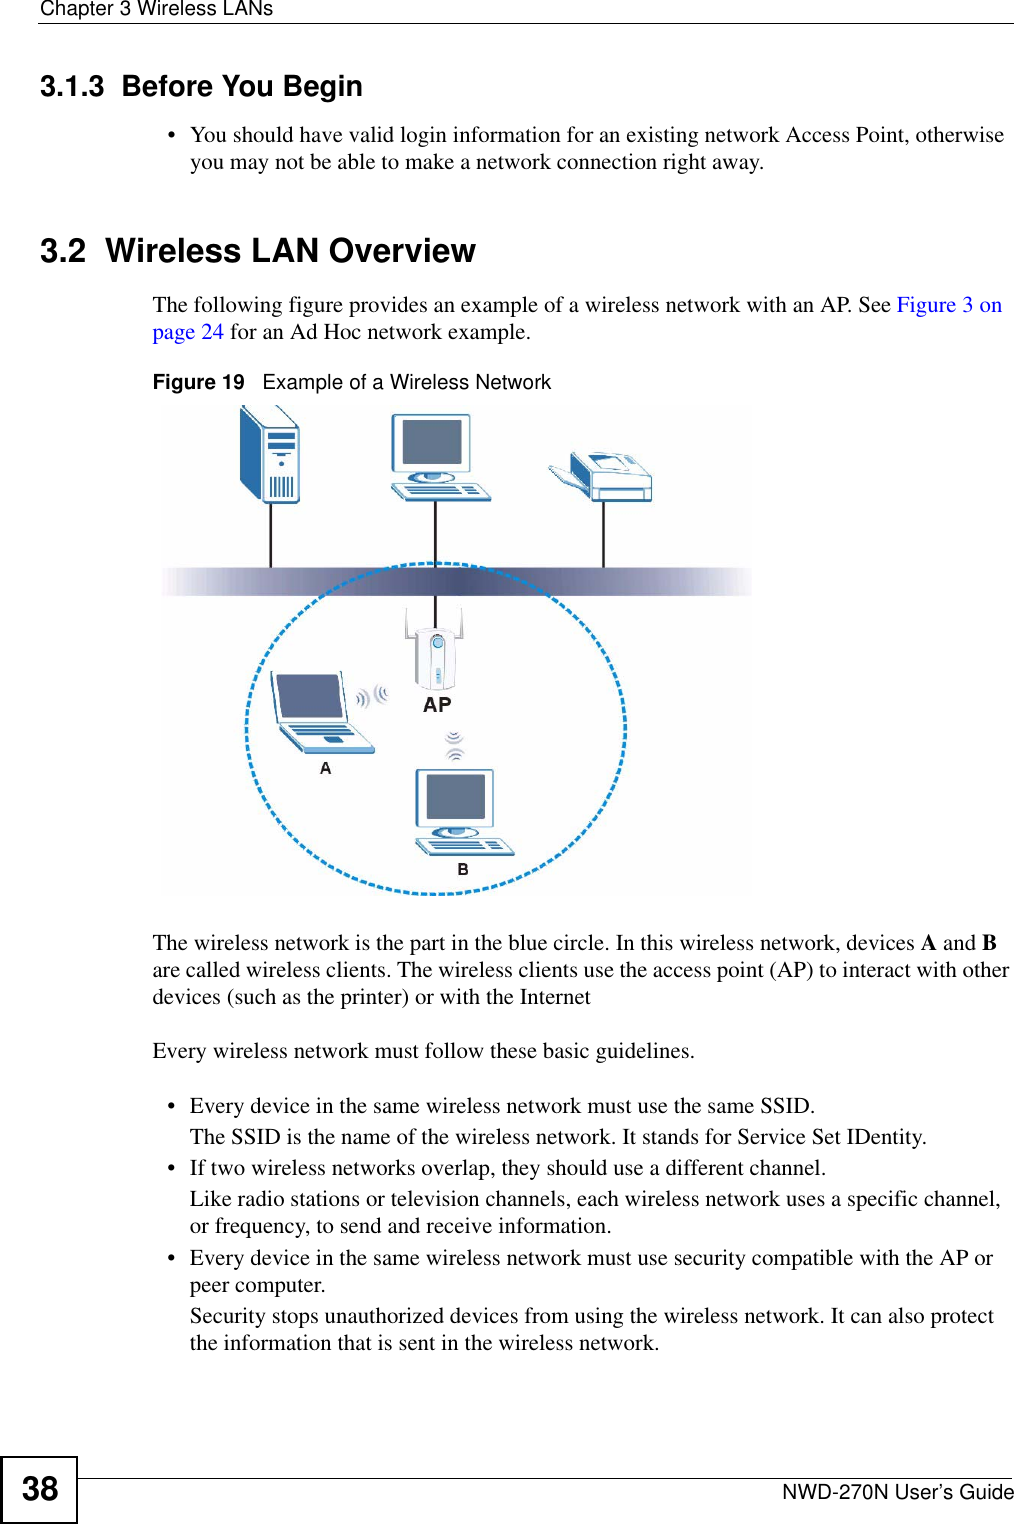 Chapter 3 Wireless LANsNWD-270N User’s Guide383.1.3  Before You Begin• You should have valid login information for an existing network Access Point, otherwise you may not be able to make a network connection right away.3.2  Wireless LAN Overview The following figure provides an example of a wireless network with an AP. See Figure 3 on page 24 for an Ad Hoc network example.Figure 19   Example of a Wireless NetworkThe wireless network is the part in the blue circle. In this wireless network, devices A and B are called wireless clients. The wireless clients use the access point (AP) to interact with other devices (such as the printer) or with the InternetEvery wireless network must follow these basic guidelines.• Every device in the same wireless network must use the same SSID.The SSID is the name of the wireless network. It stands for Service Set IDentity.• If two wireless networks overlap, they should use a different channel.Like radio stations or television channels, each wireless network uses a specific channel, or frequency, to send and receive information.• Every device in the same wireless network must use security compatible with the AP or peer computer.Security stops unauthorized devices from using the wireless network. It can also protect the information that is sent in the wireless network.